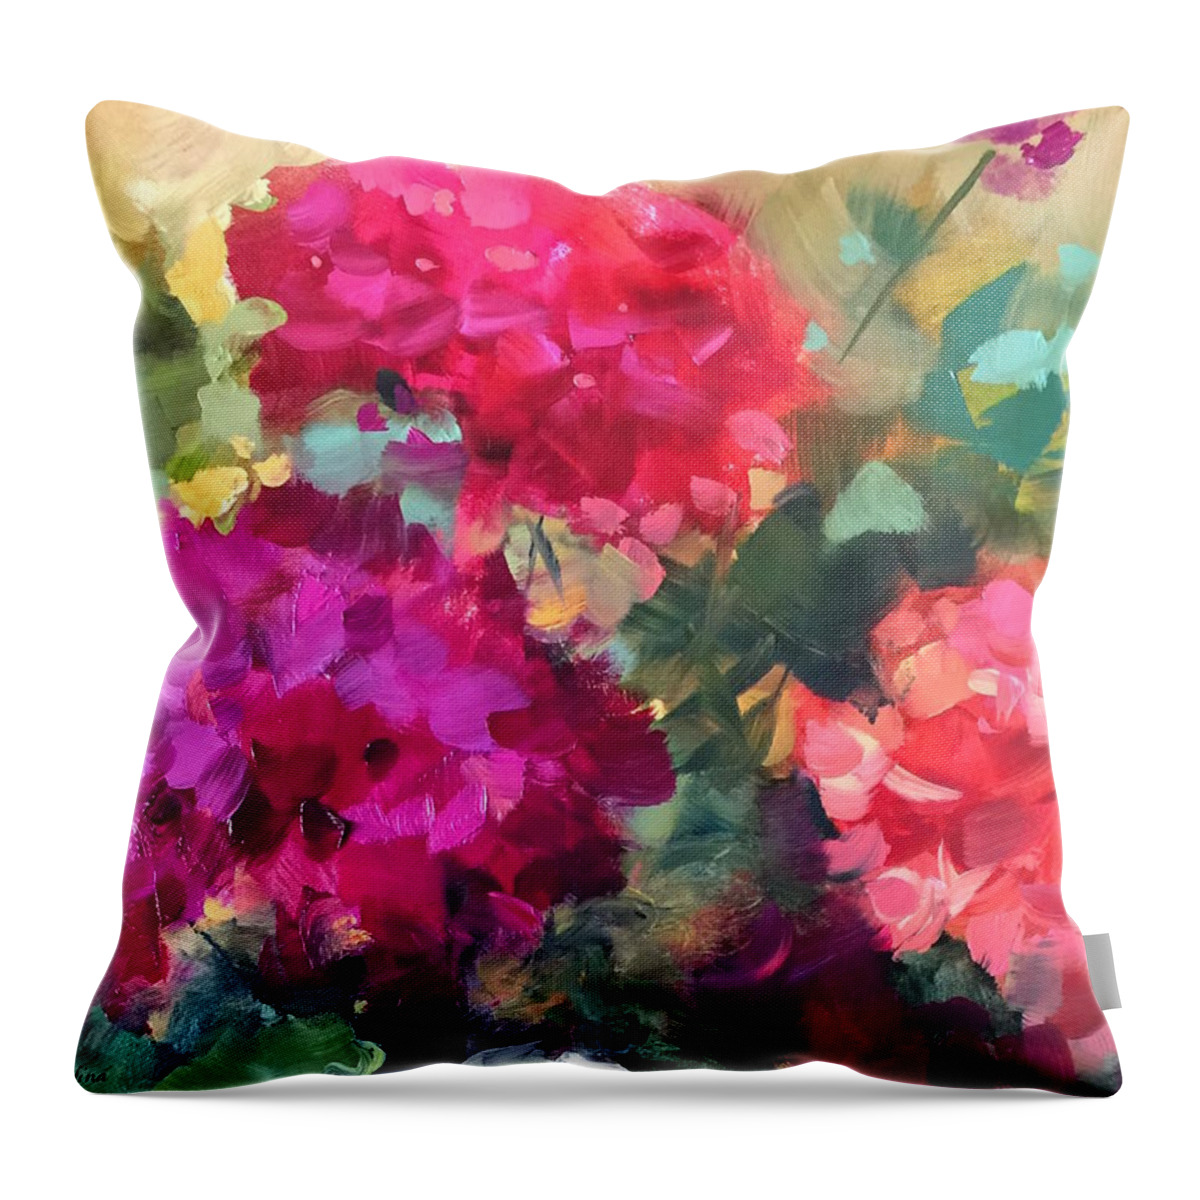 Geraniums Throw Pillow featuring the painting Future Bloomers Geraniums by Nancy Medina